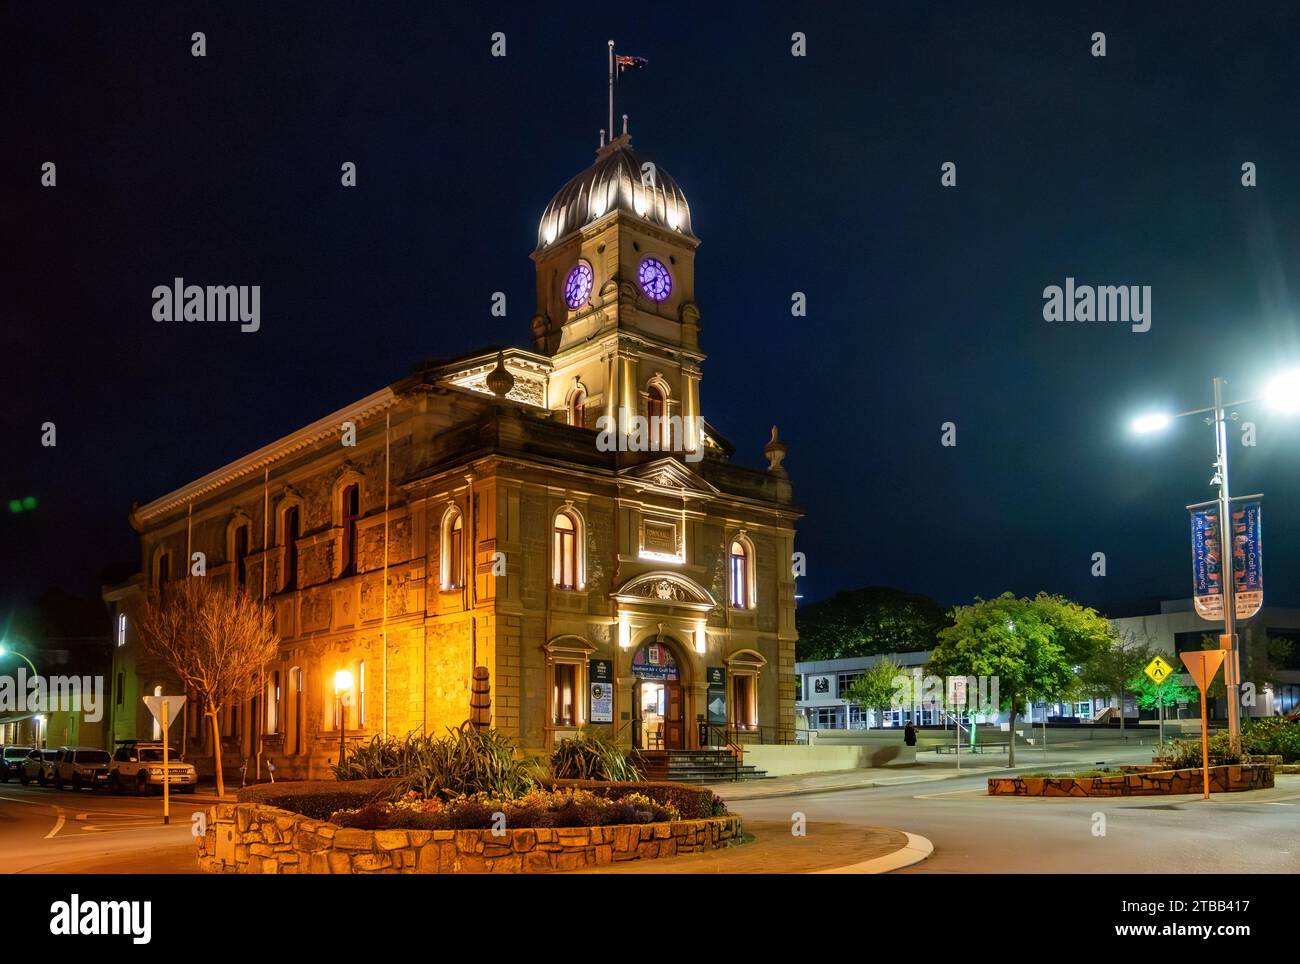 Albany Town Hall building at night. Western Australia. Stock Photo